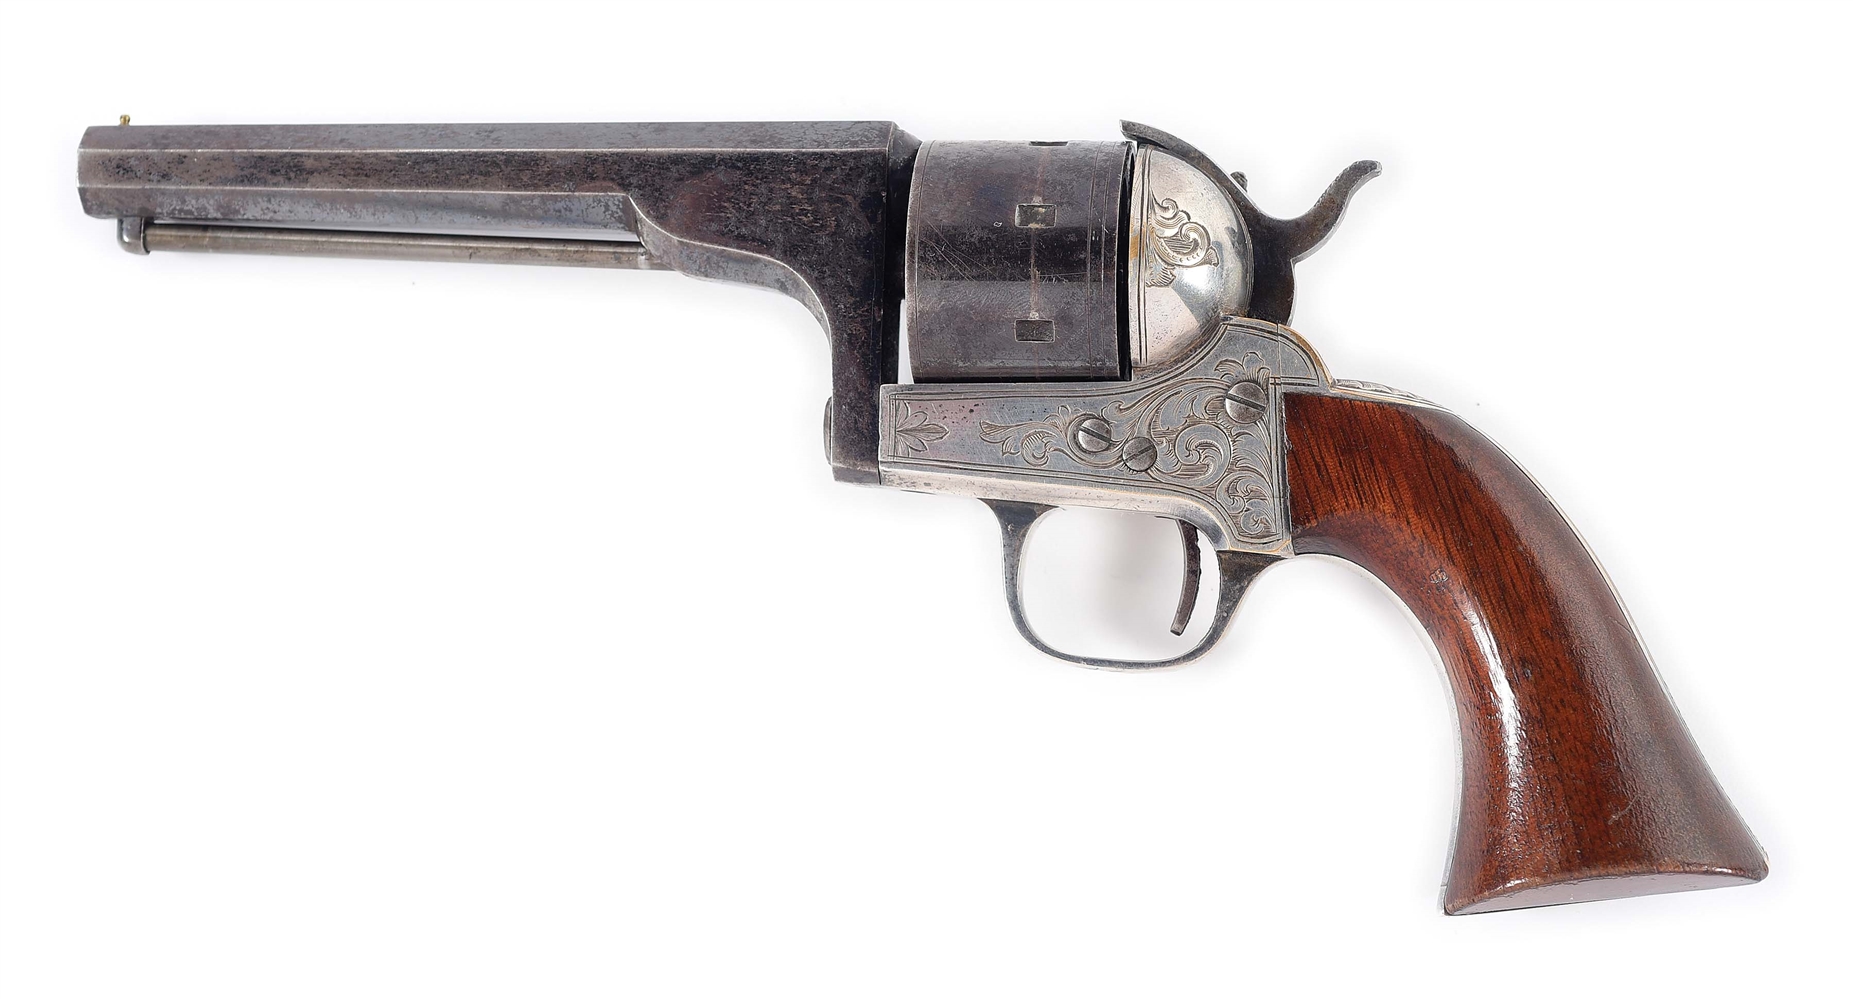 (A) D. MOORE SILVER PLATED AND ENGRAVED REVOLVER.